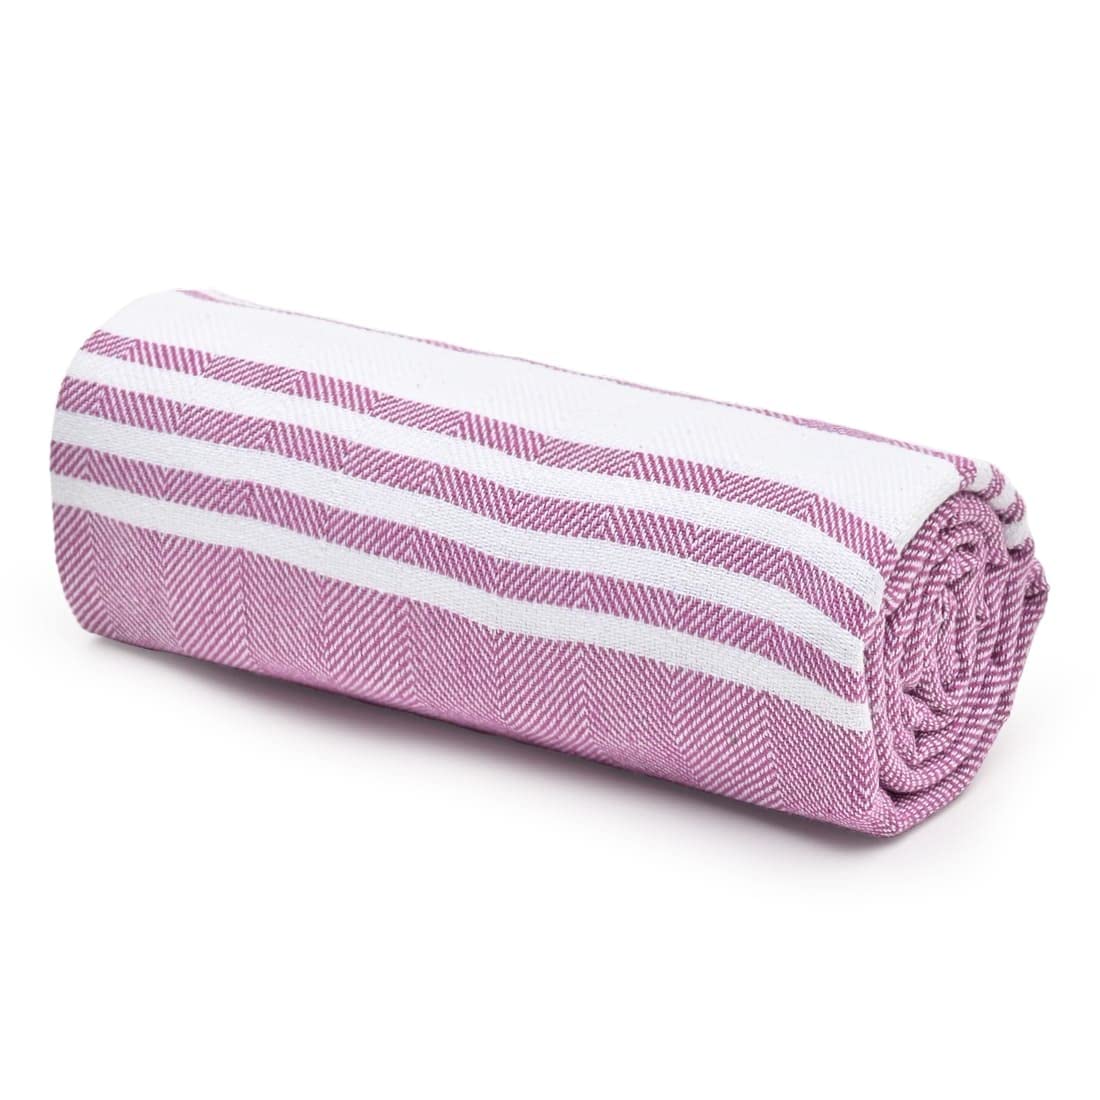 100% Cotton Turkish Bath Towel | Quick Drying Cotton Towel | Light Weight, Soft & Absorbent Turkish Towel (Pack of 1, Purple)